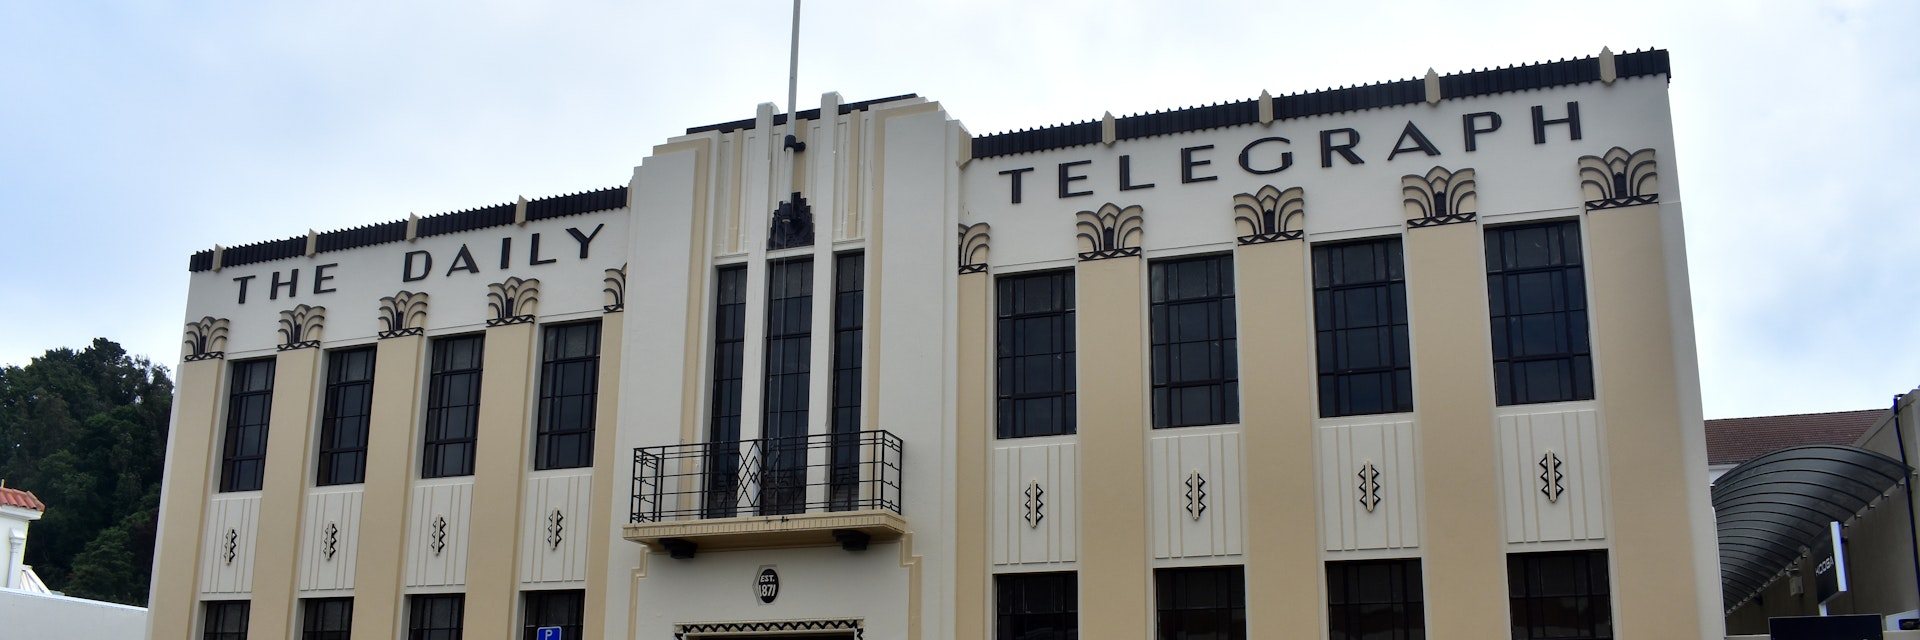 The Daily Telegraph building in Napier, New Zealand.